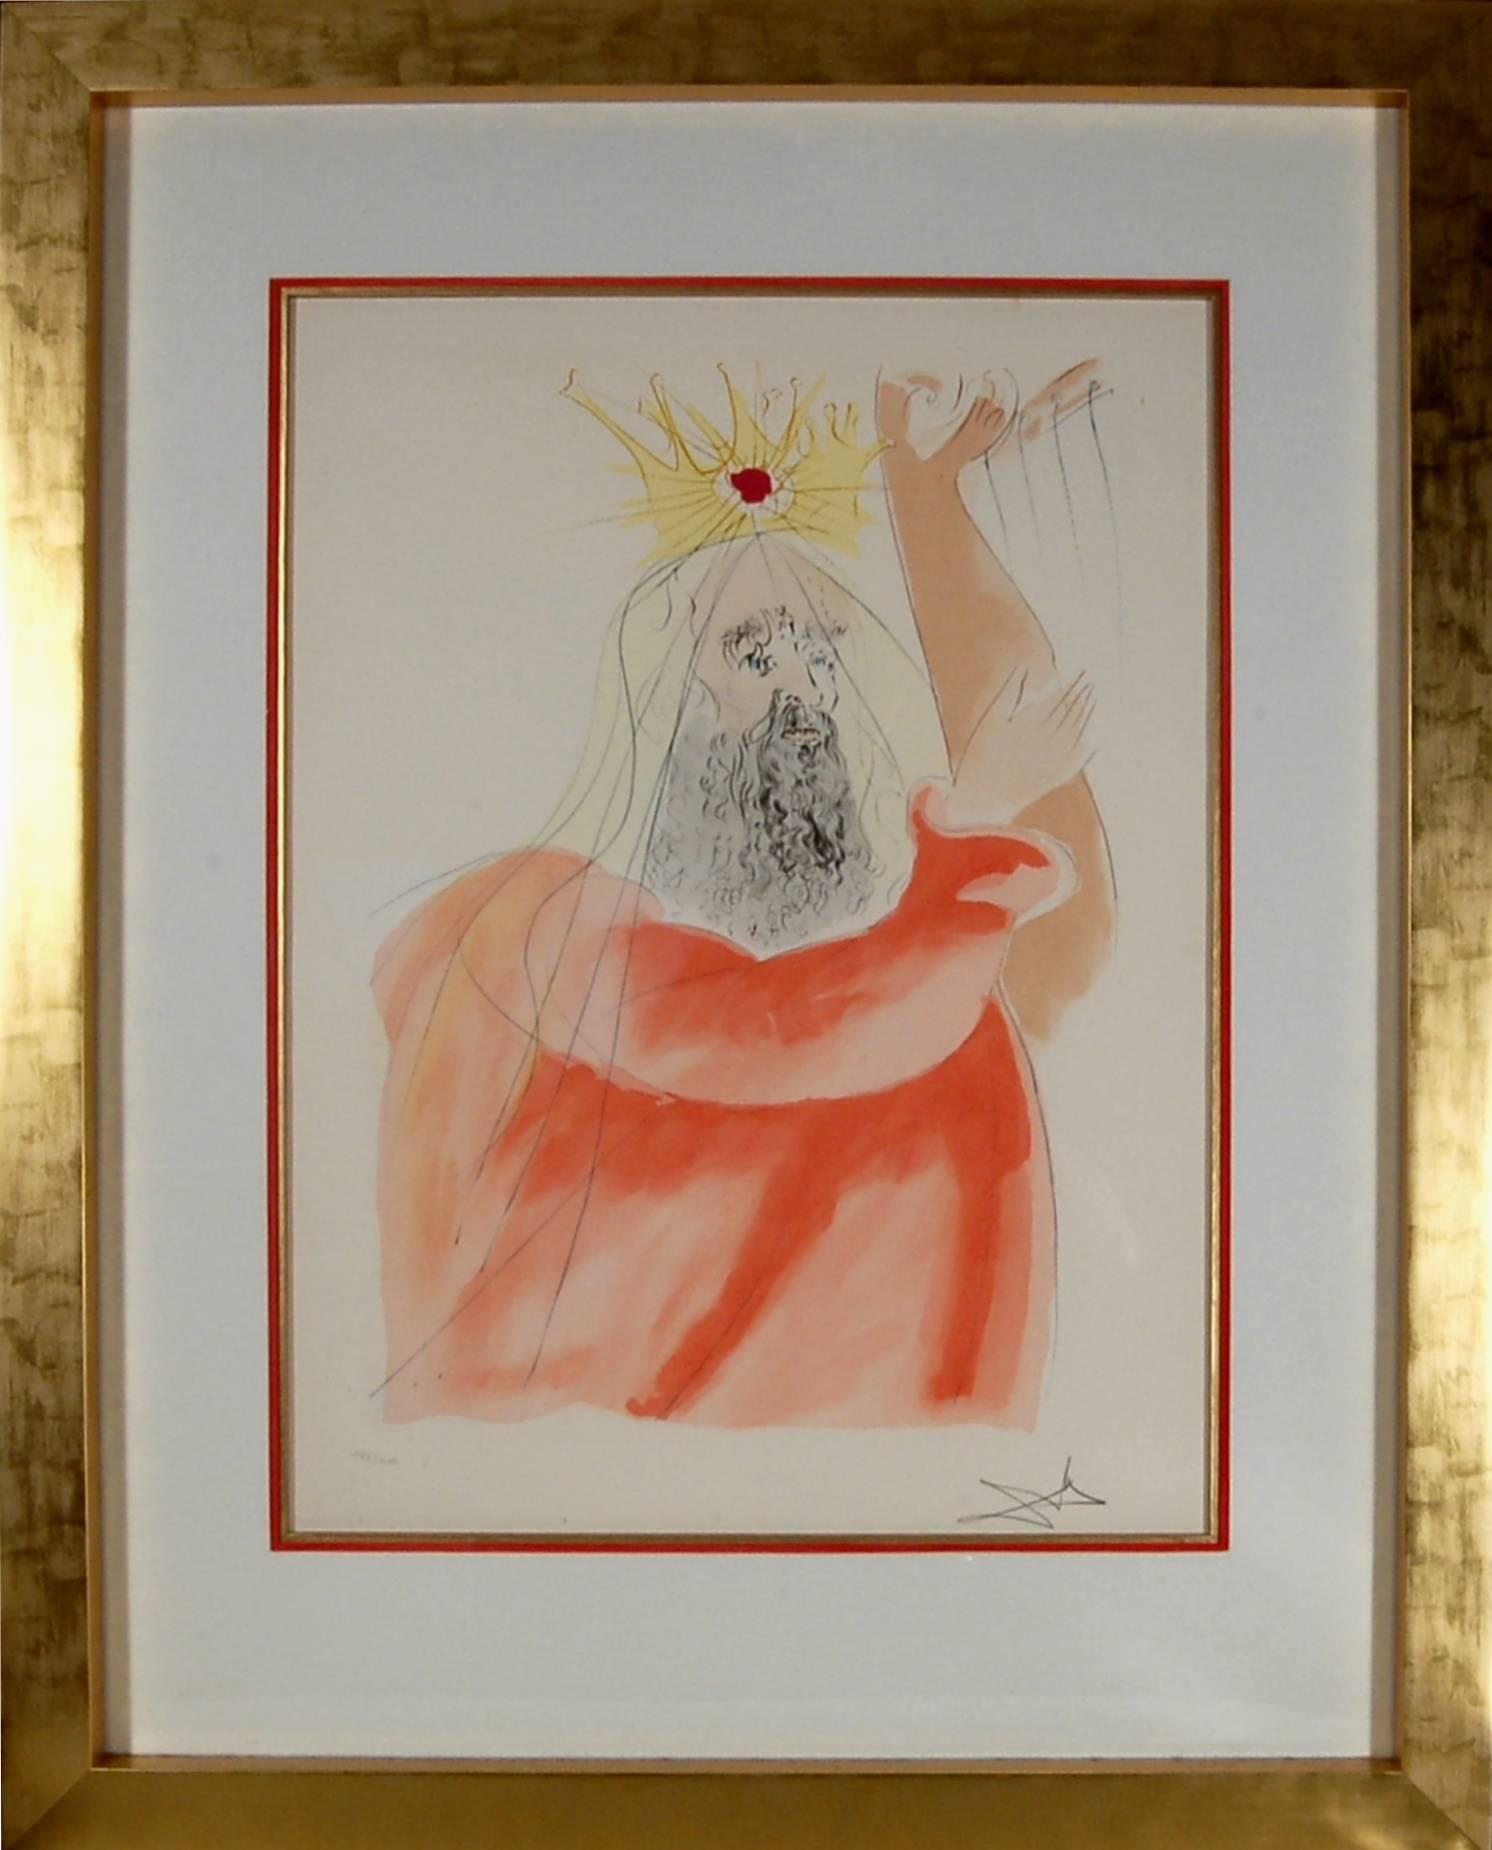 Salvador Dalí Figurative Print - King David, from the suite Our Historical Heritage.